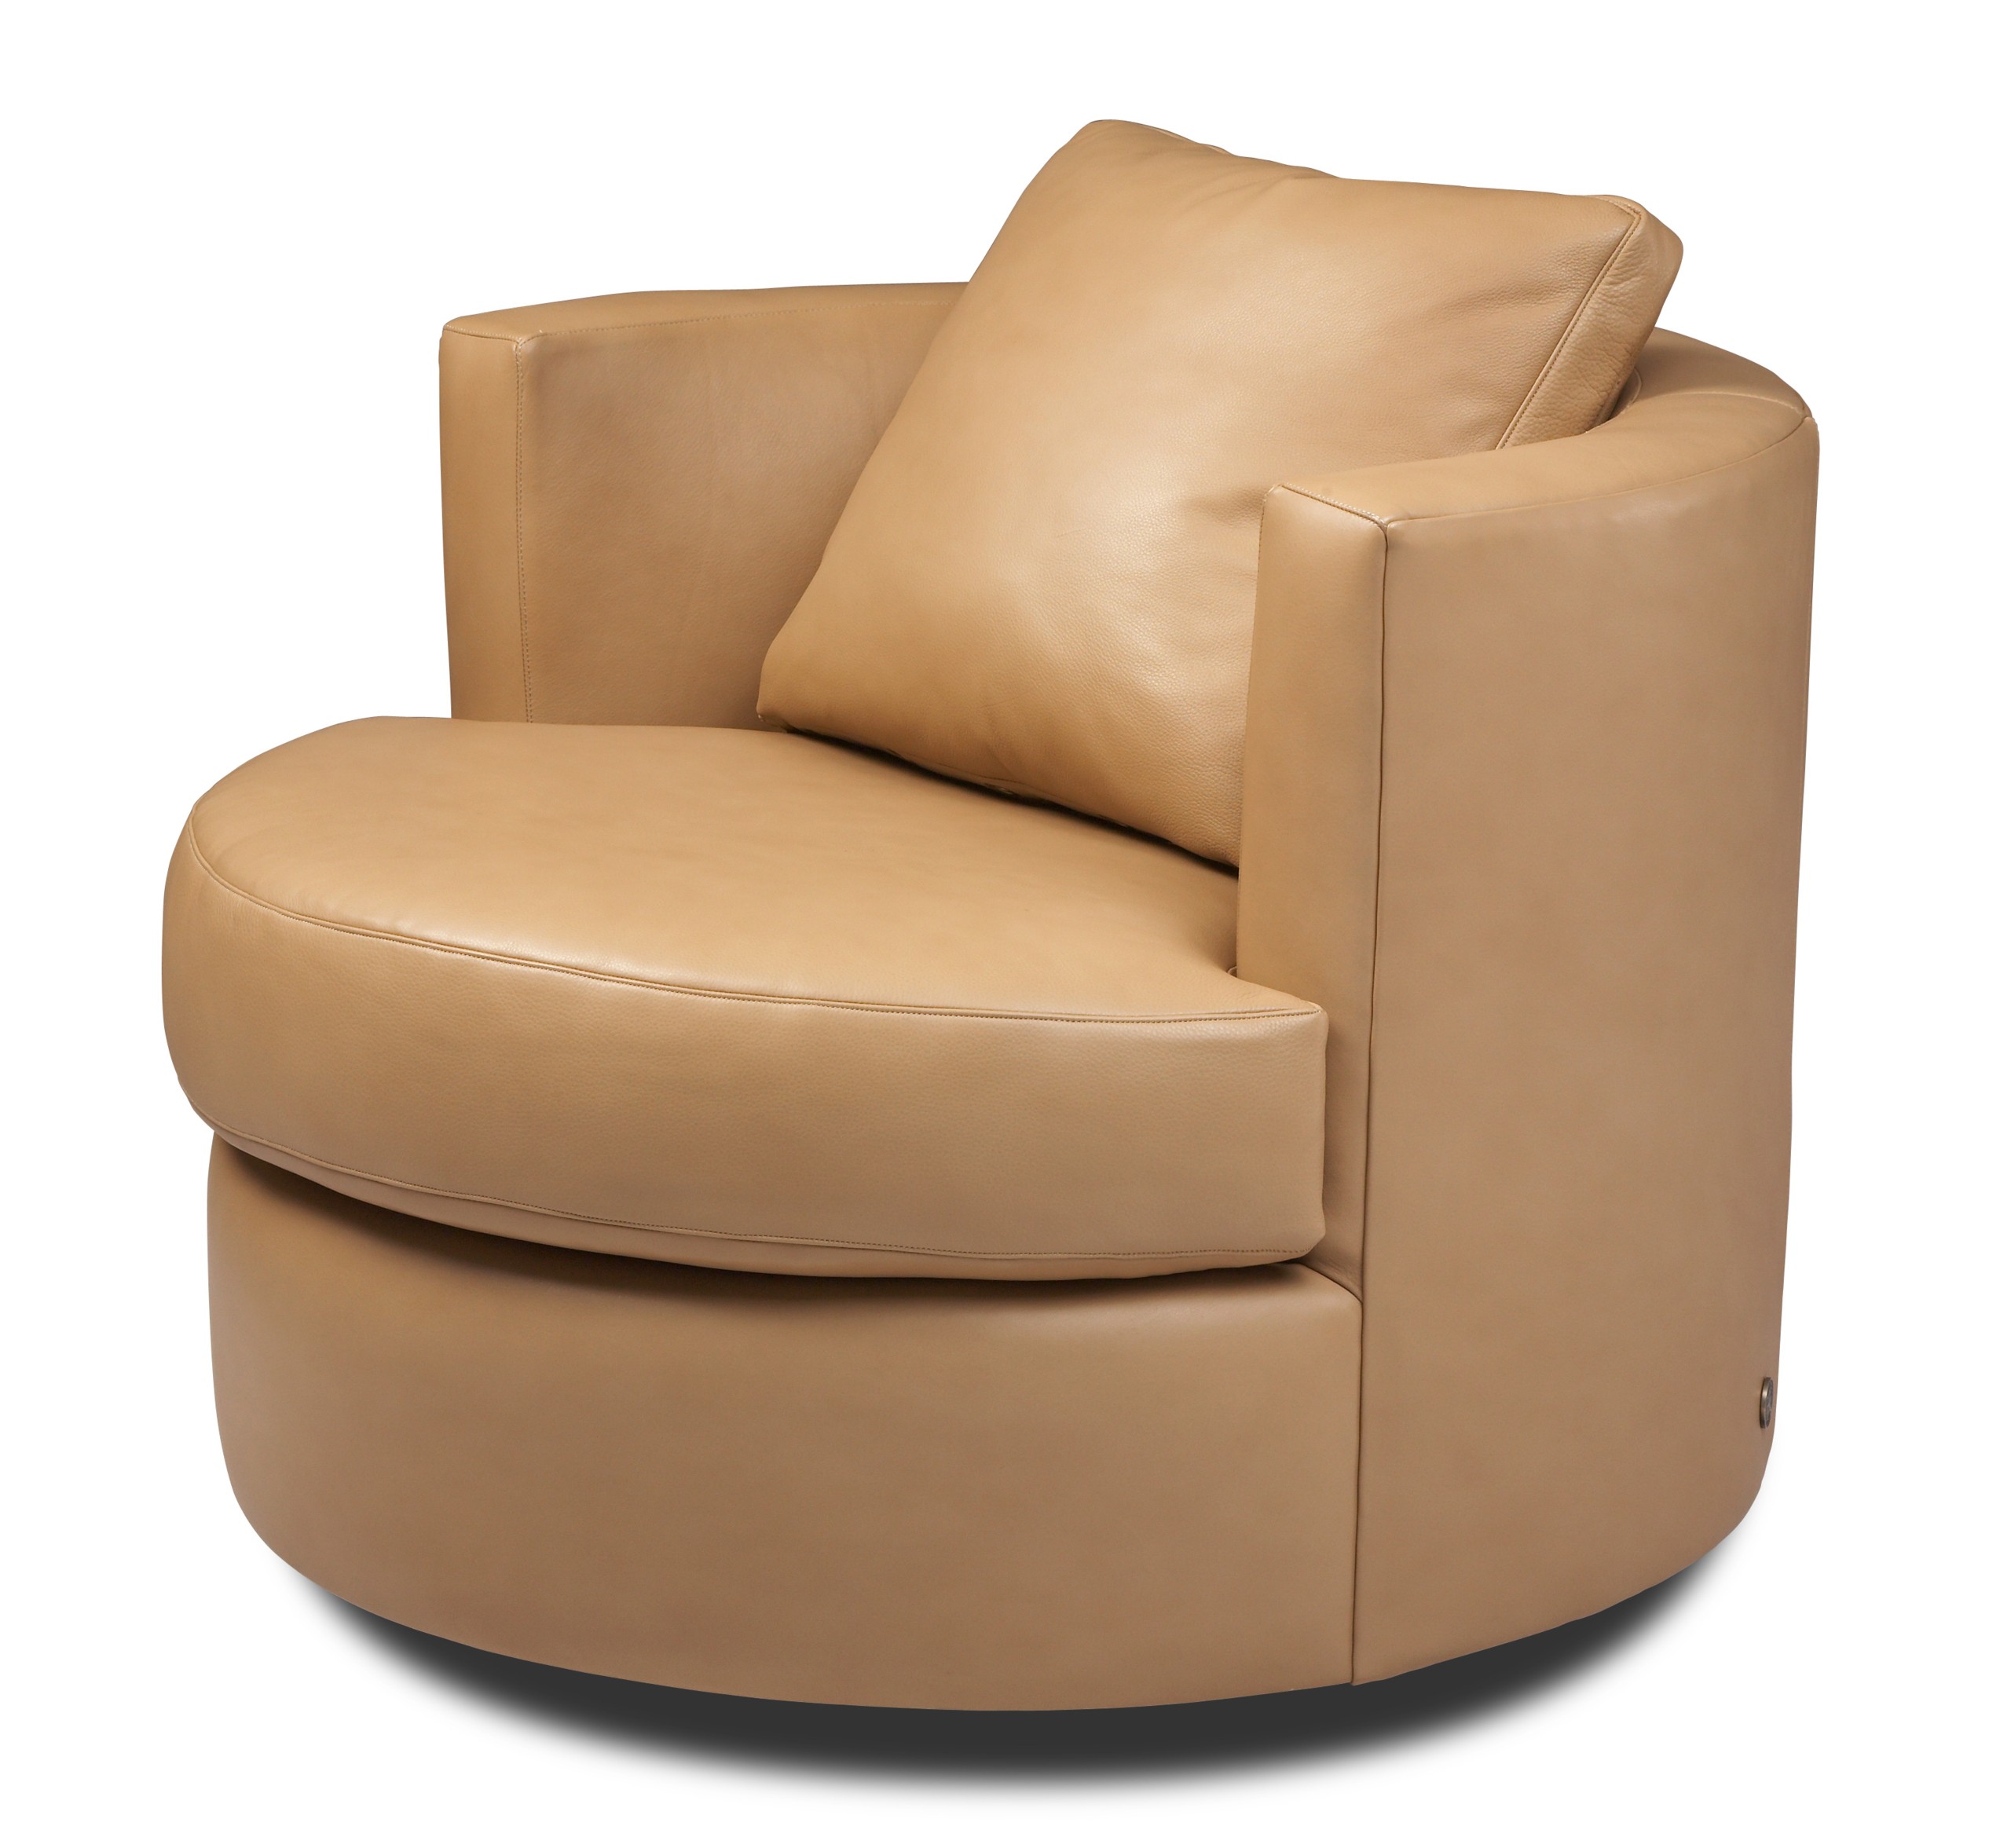 Small round swivel chair